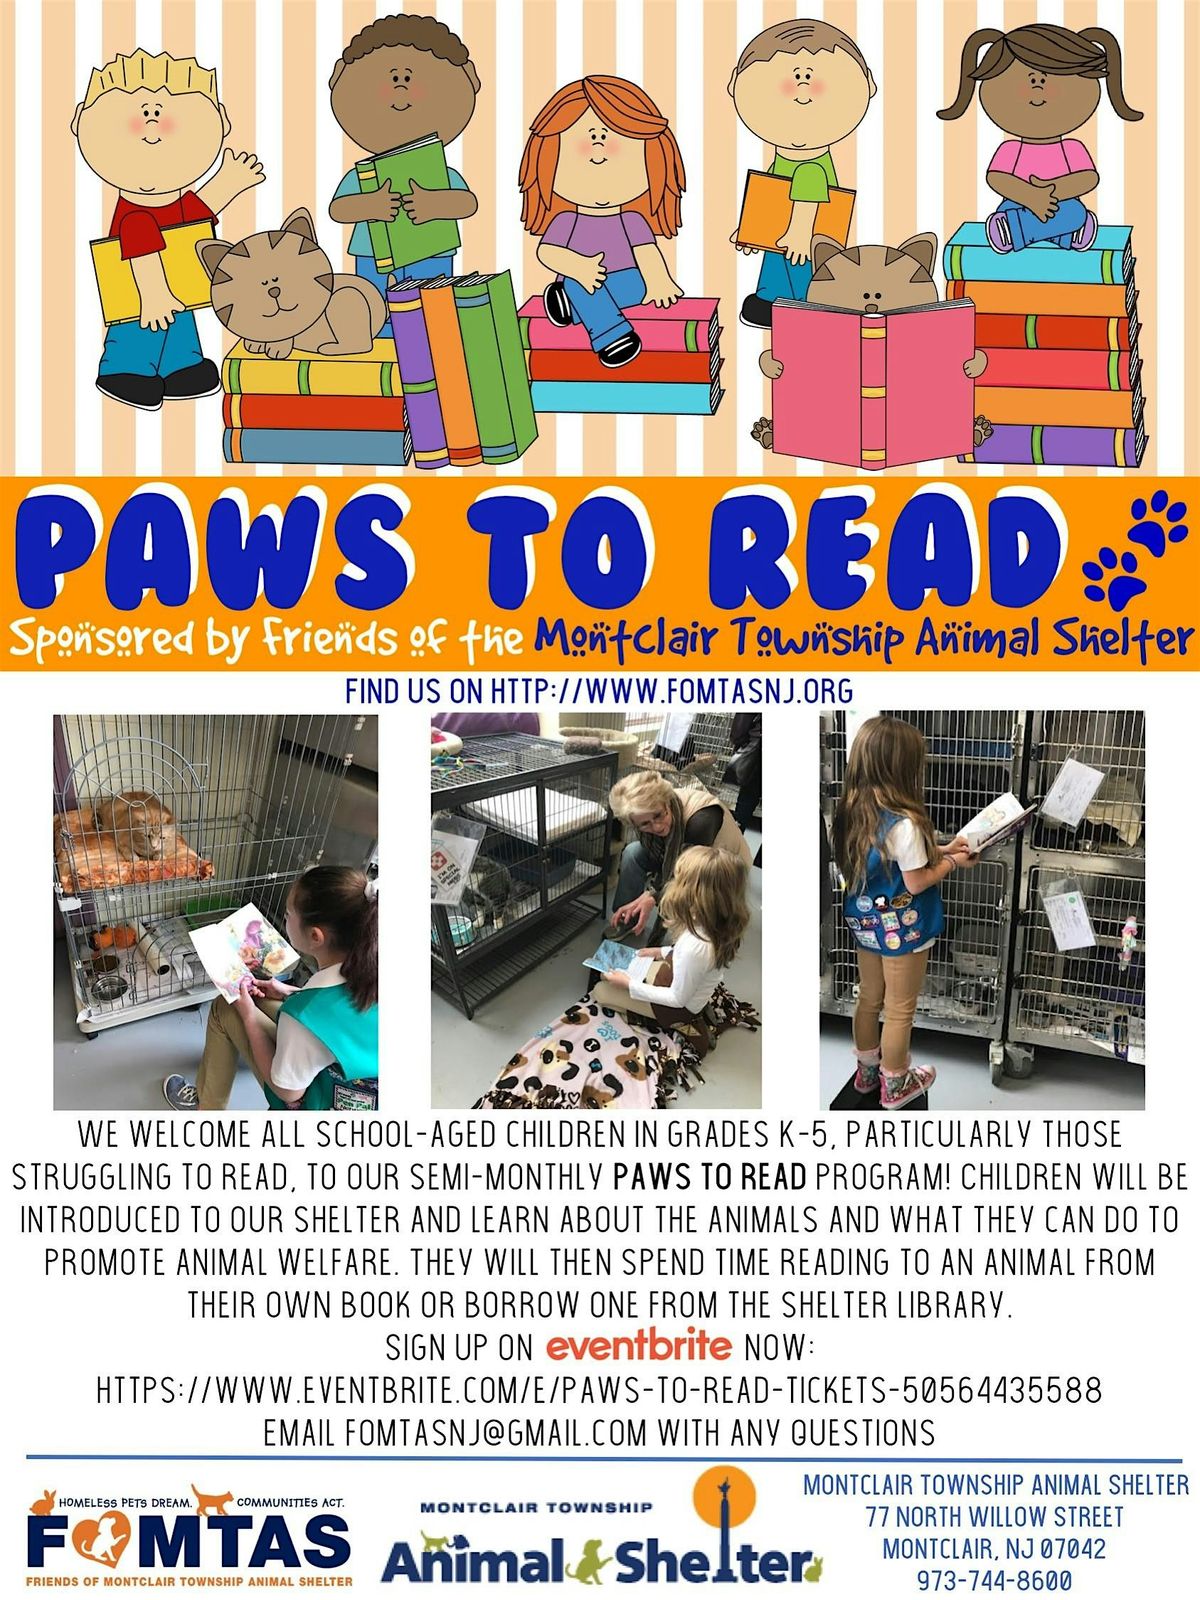 PAWS TO READ